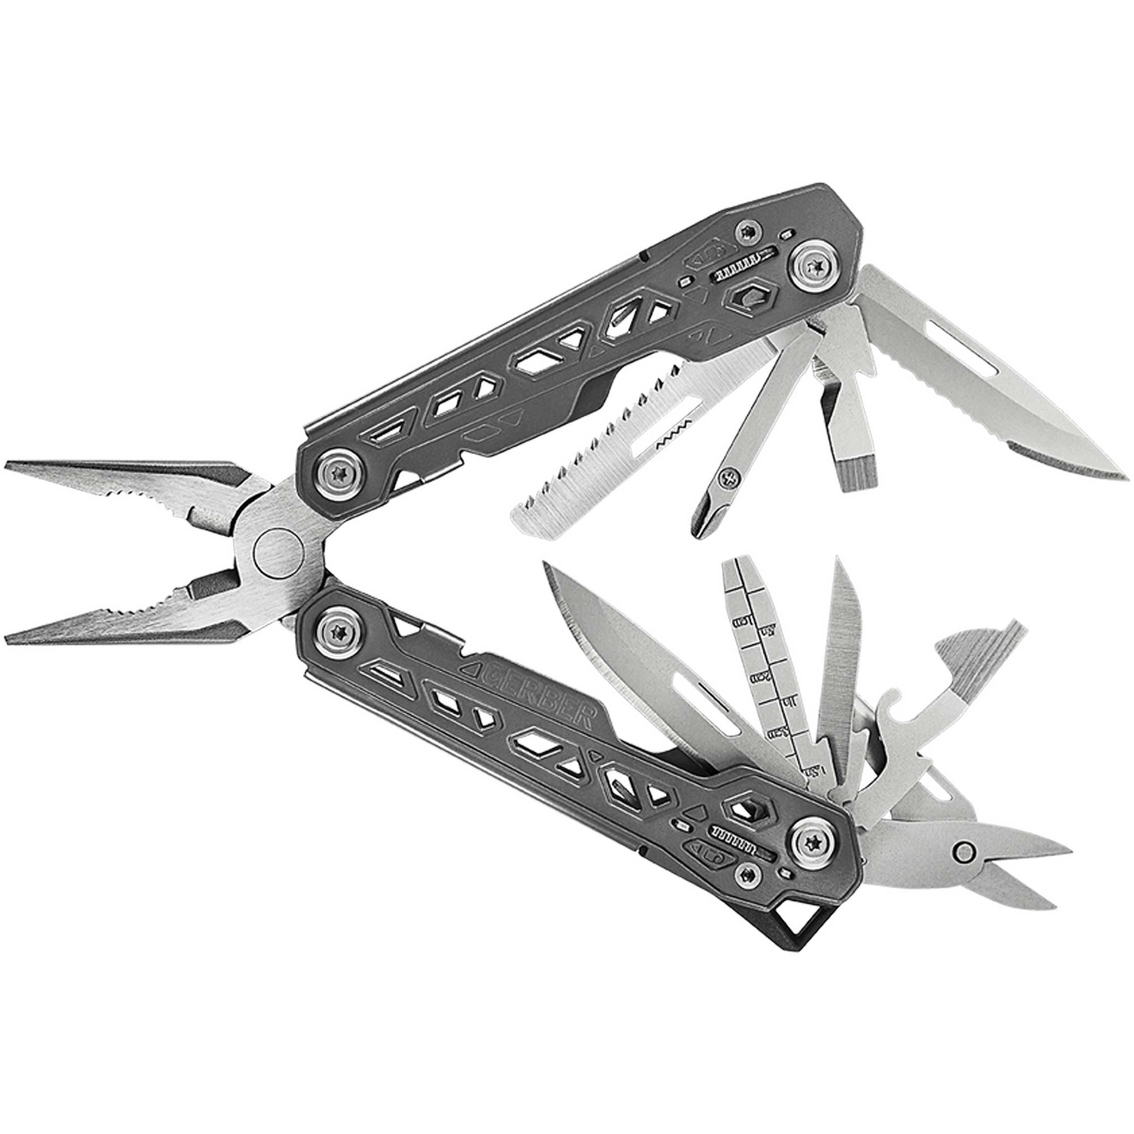 Gerber Knives and Tools Suspension Truss Multi Tool